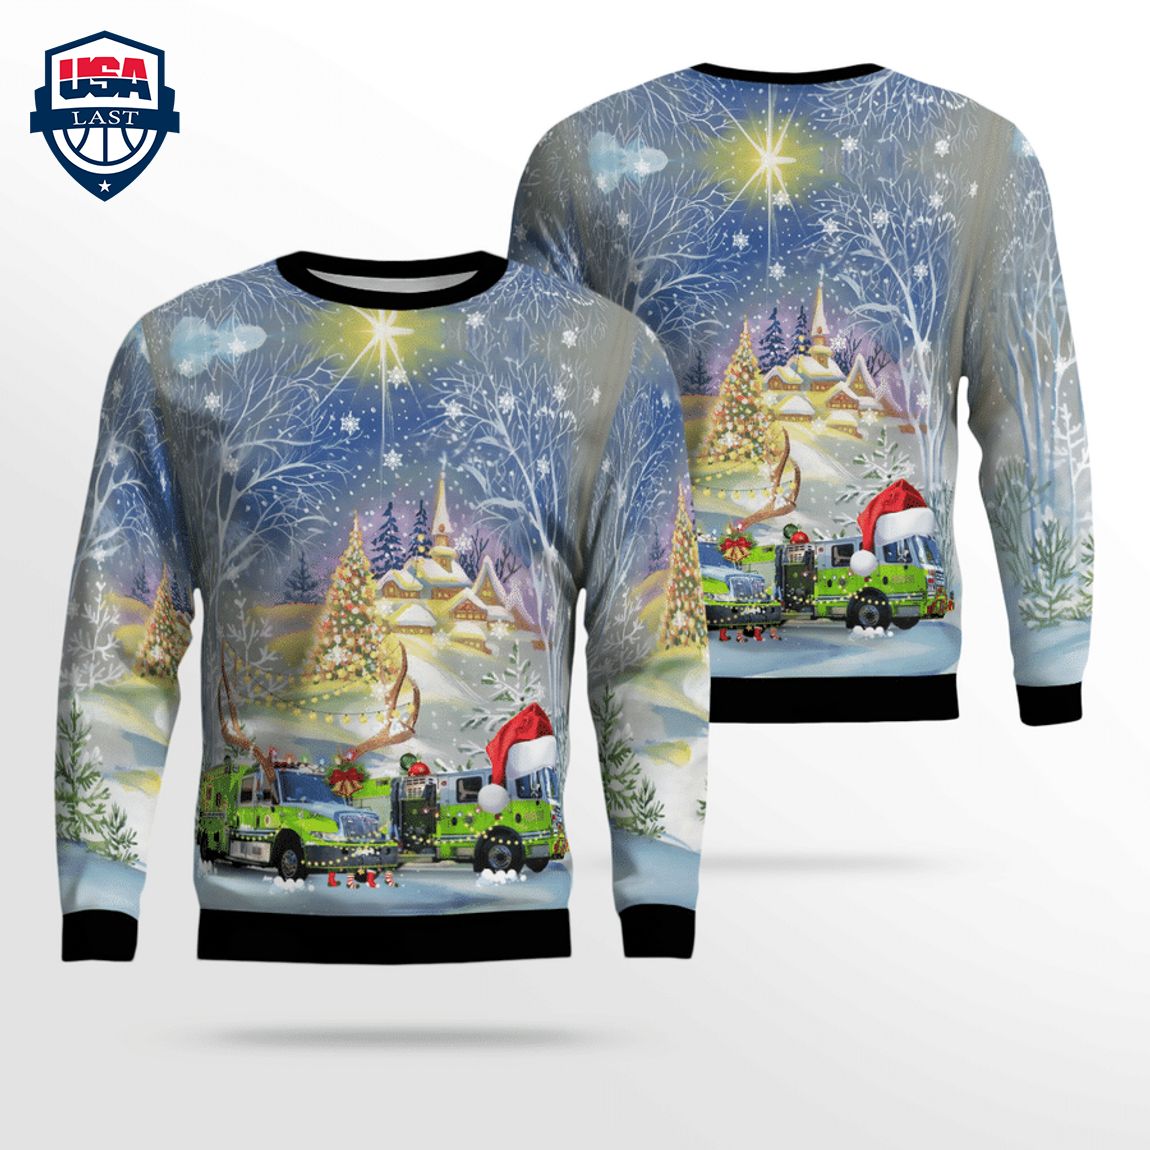 Florida Miami-Dade Fire Rescue Department 3D Christmas Sweater